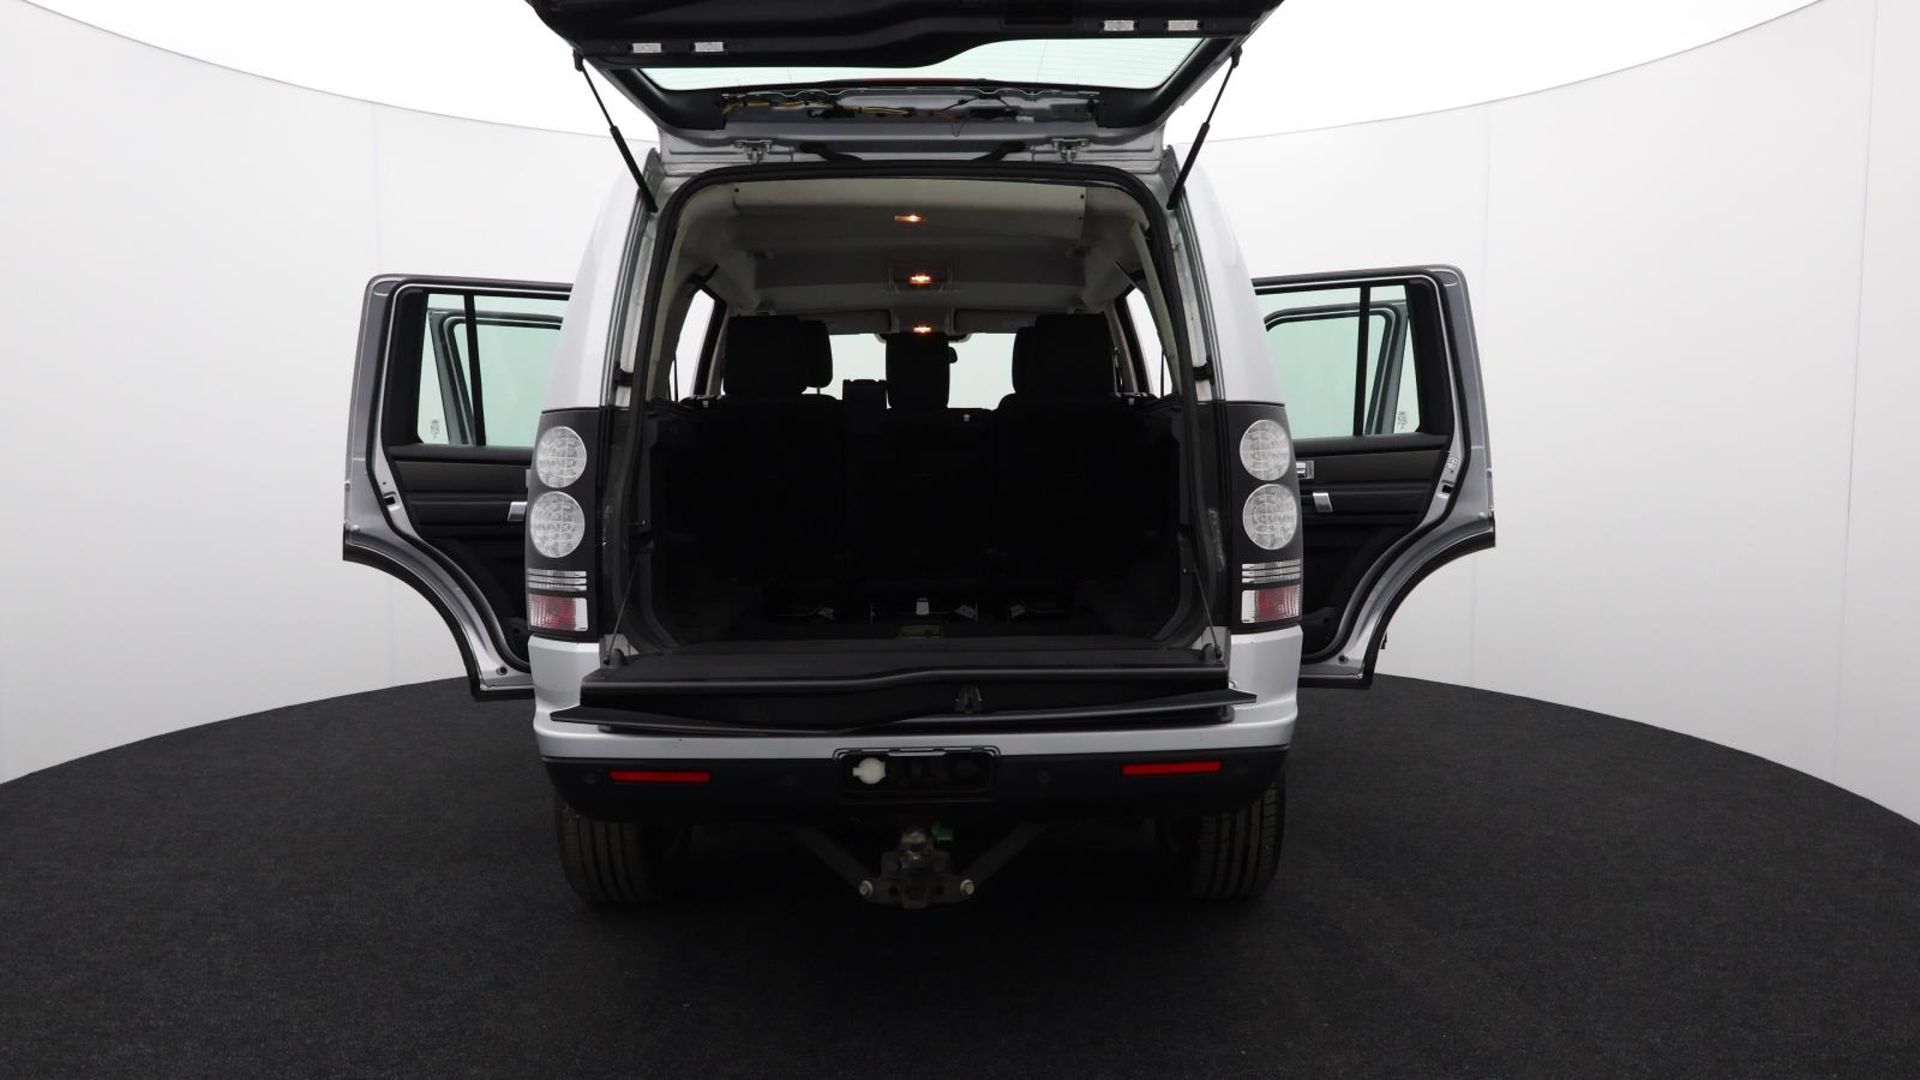 Land Rover Discovery SDV6 SE - 2015 - Automatic - Diesel - 2993cc 6 Cylinder engine - LJ15 LTE - Image 14 of 44